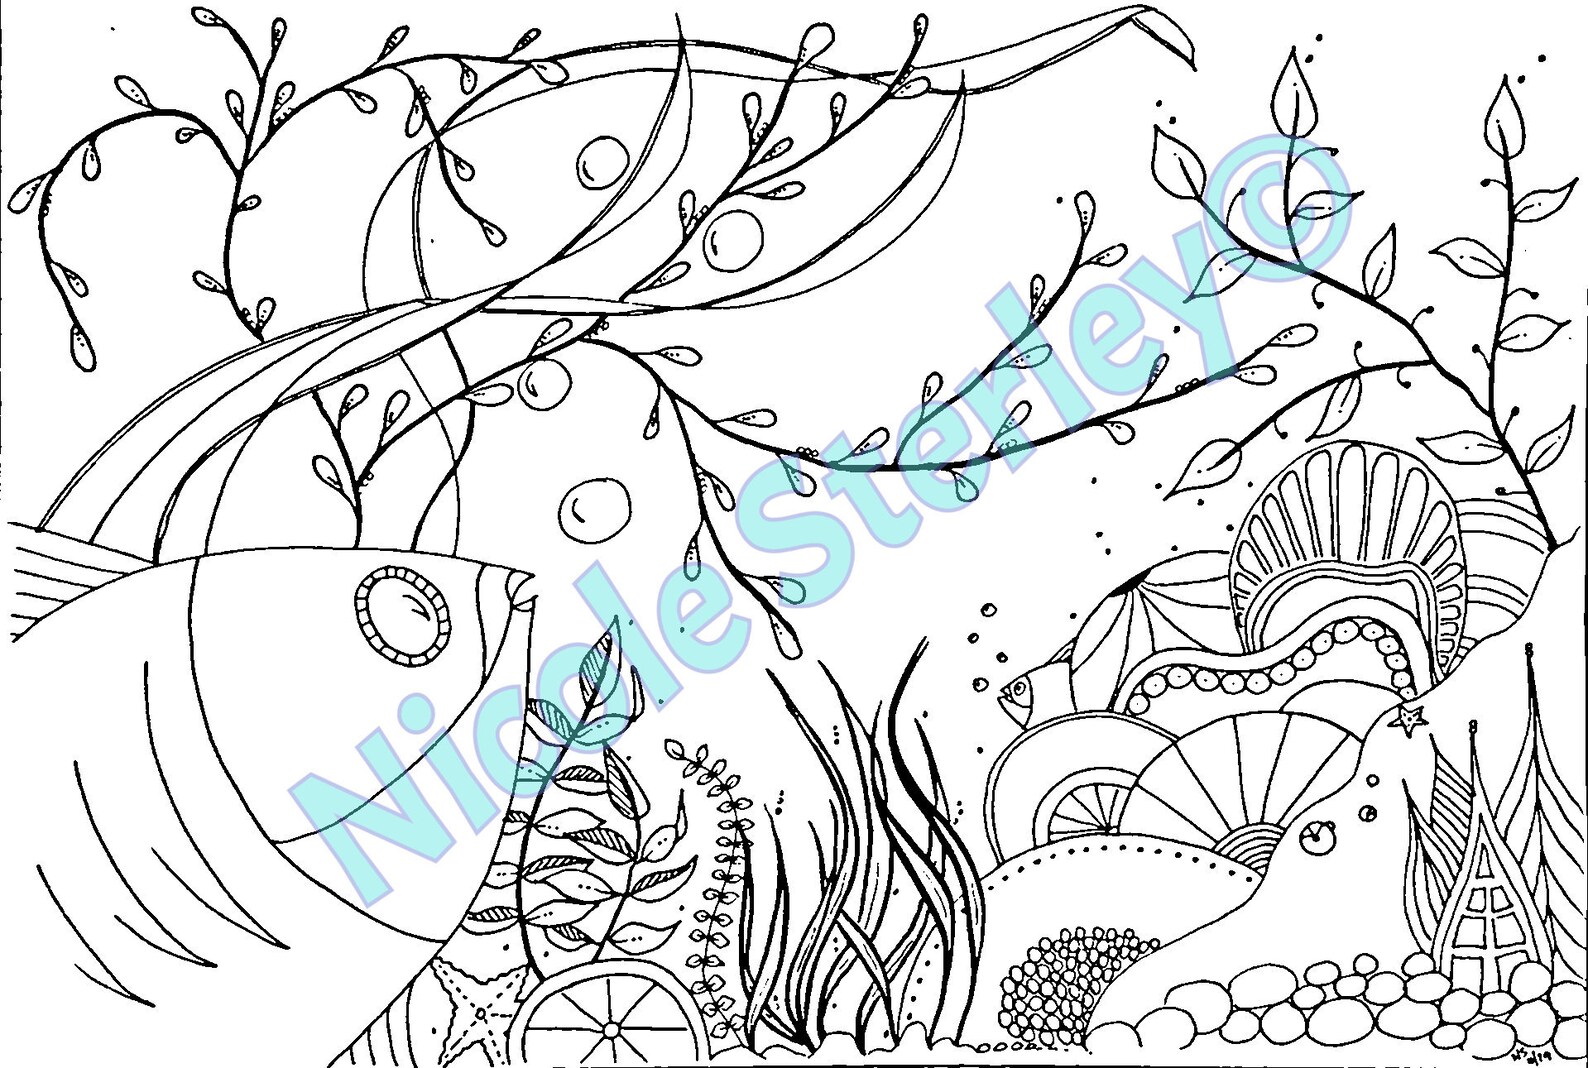 Deep Sea Printable Adult Colouring Page Instant Download | Etsy